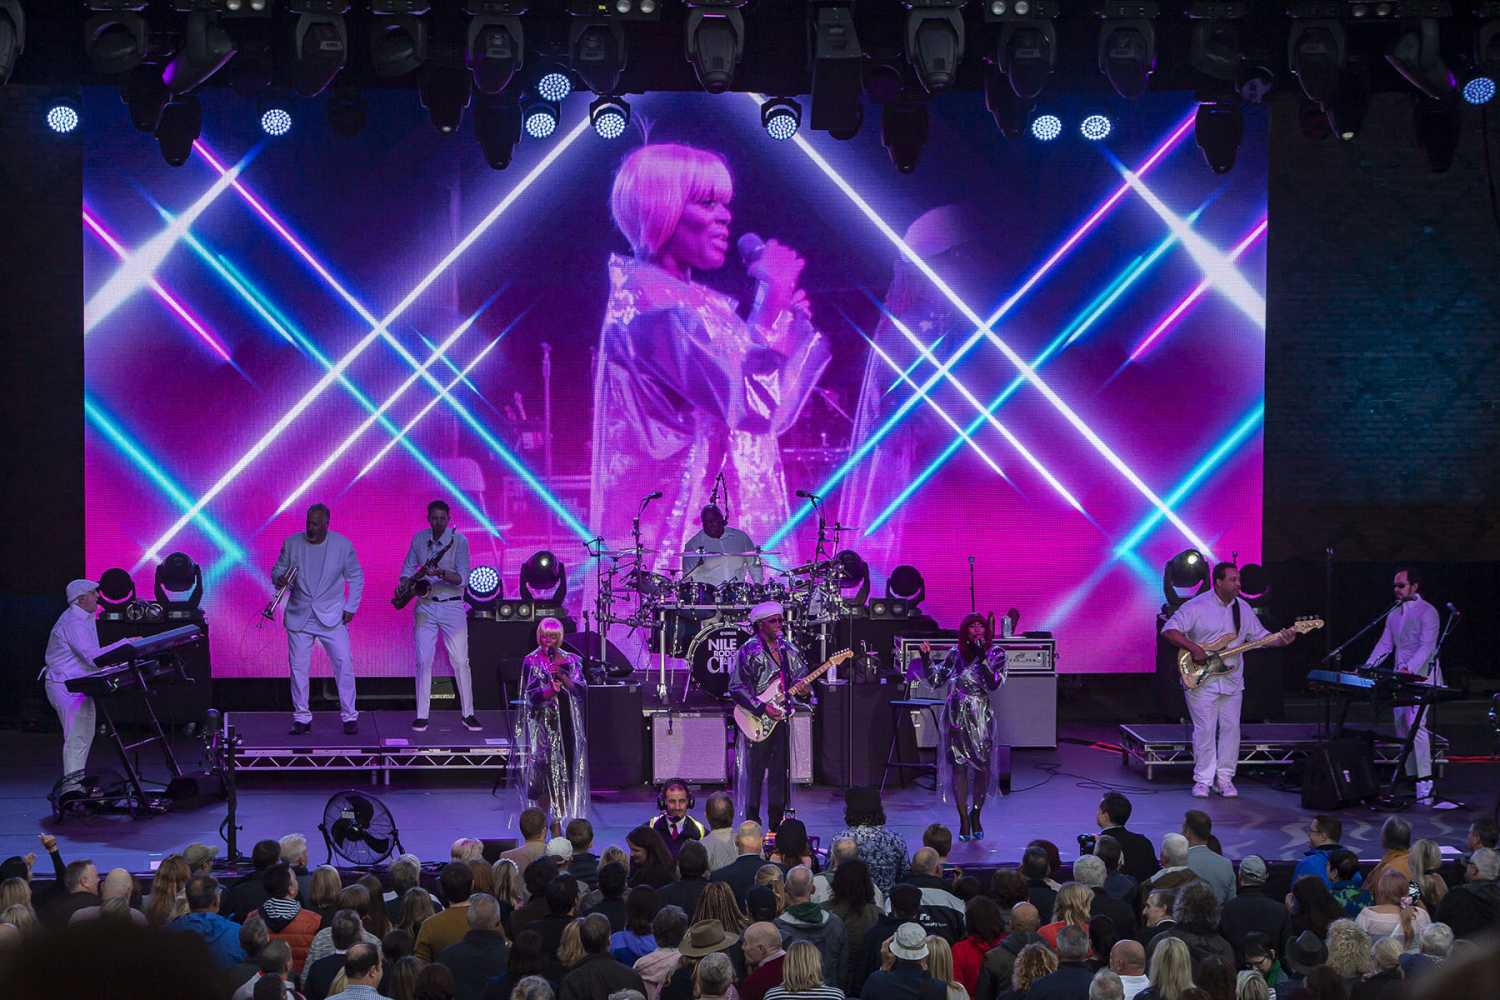 The line-up included Kylie Minogue, Nile Rodgers & Chic, Tears for Fears and The Jacksons (photo: Lindsay Cave)